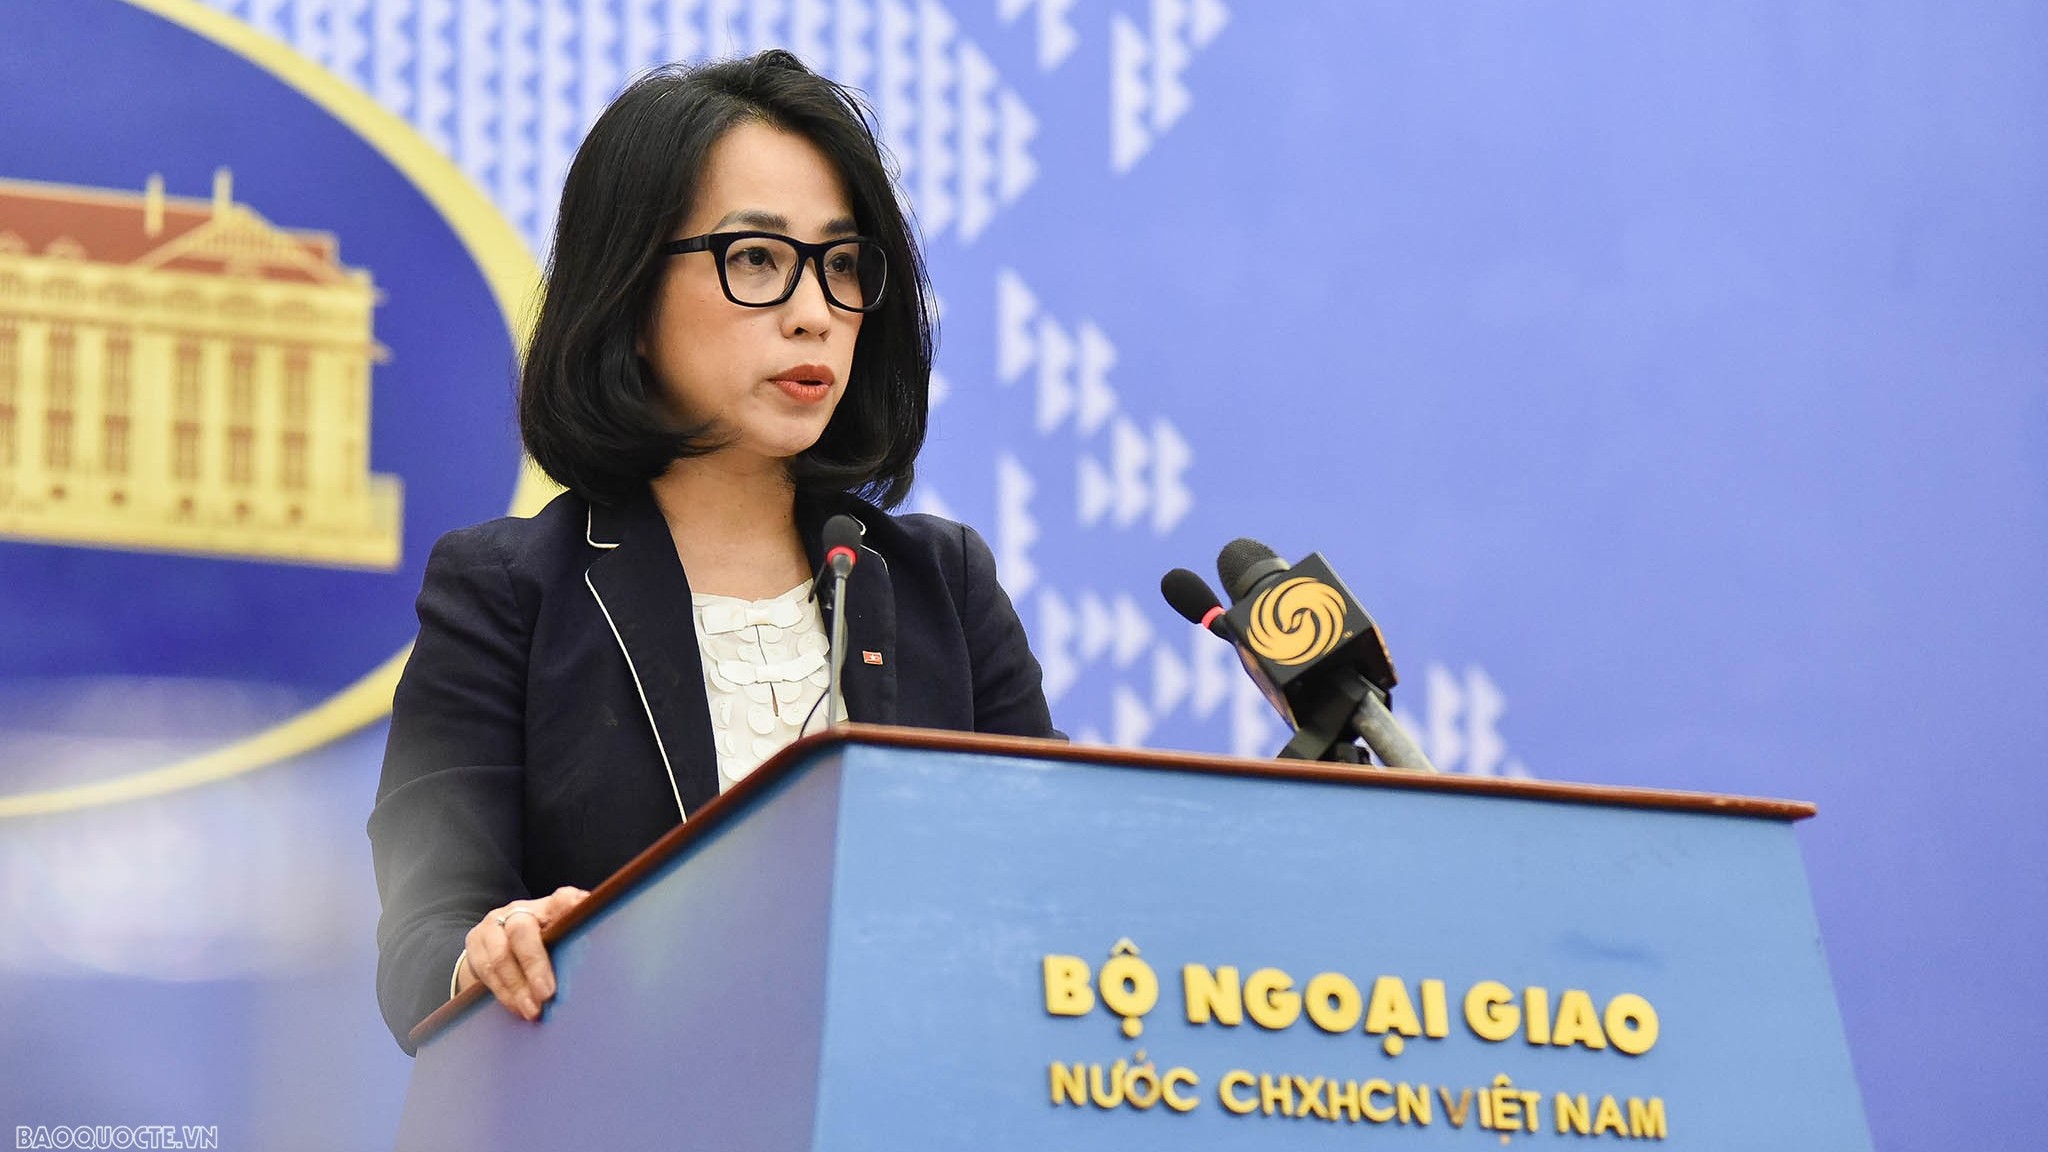 Vietnam opposes Australia’s issuance of items with 'yellow flags': Deputy Spokesperson